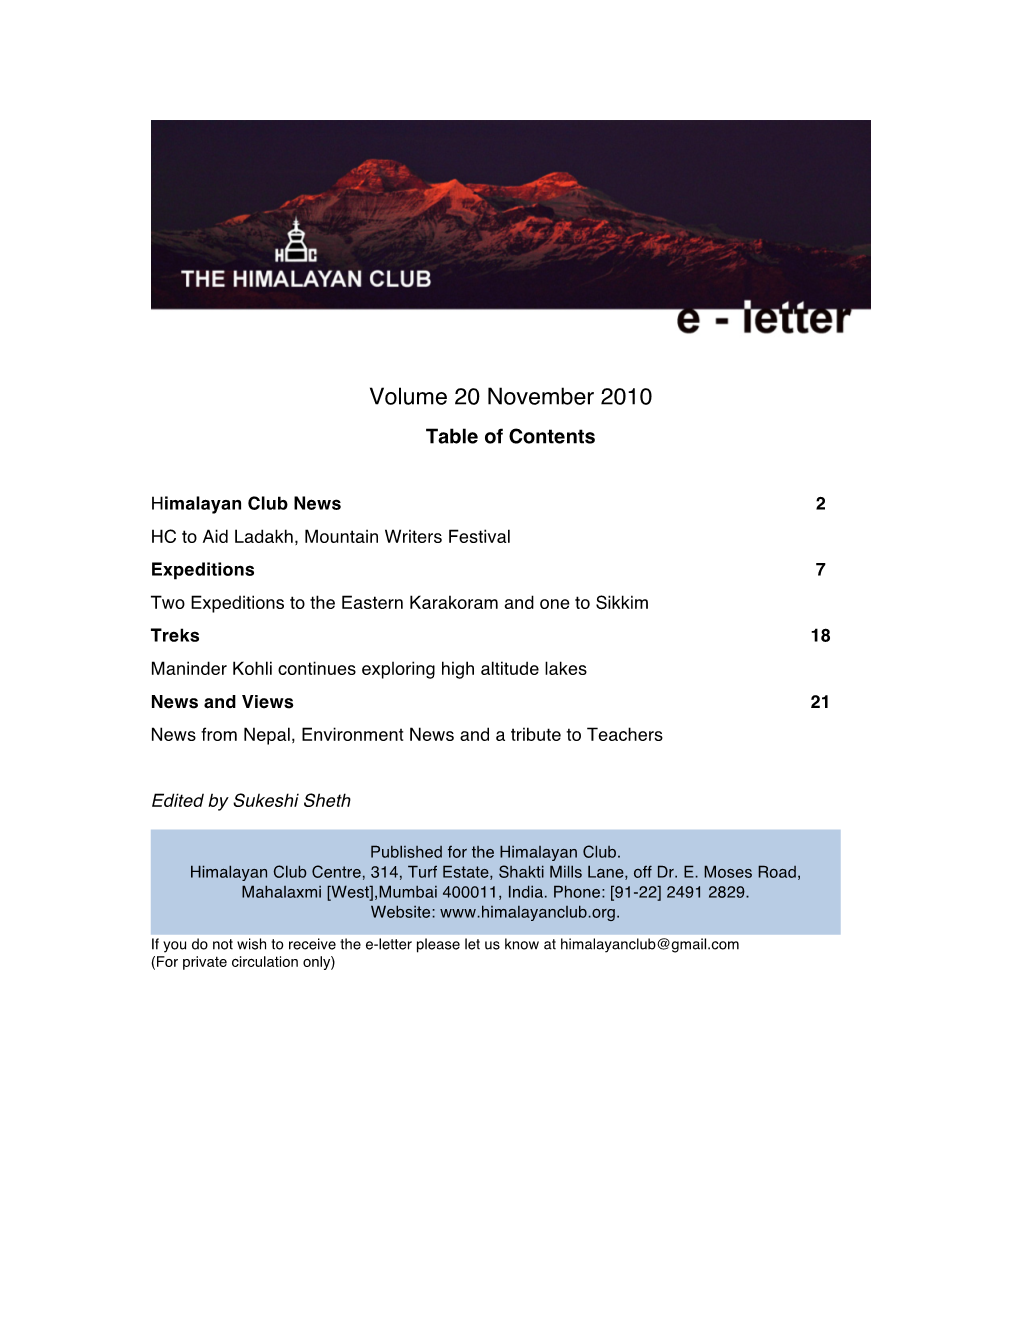 Volume 20 November 2010 Table of Contents